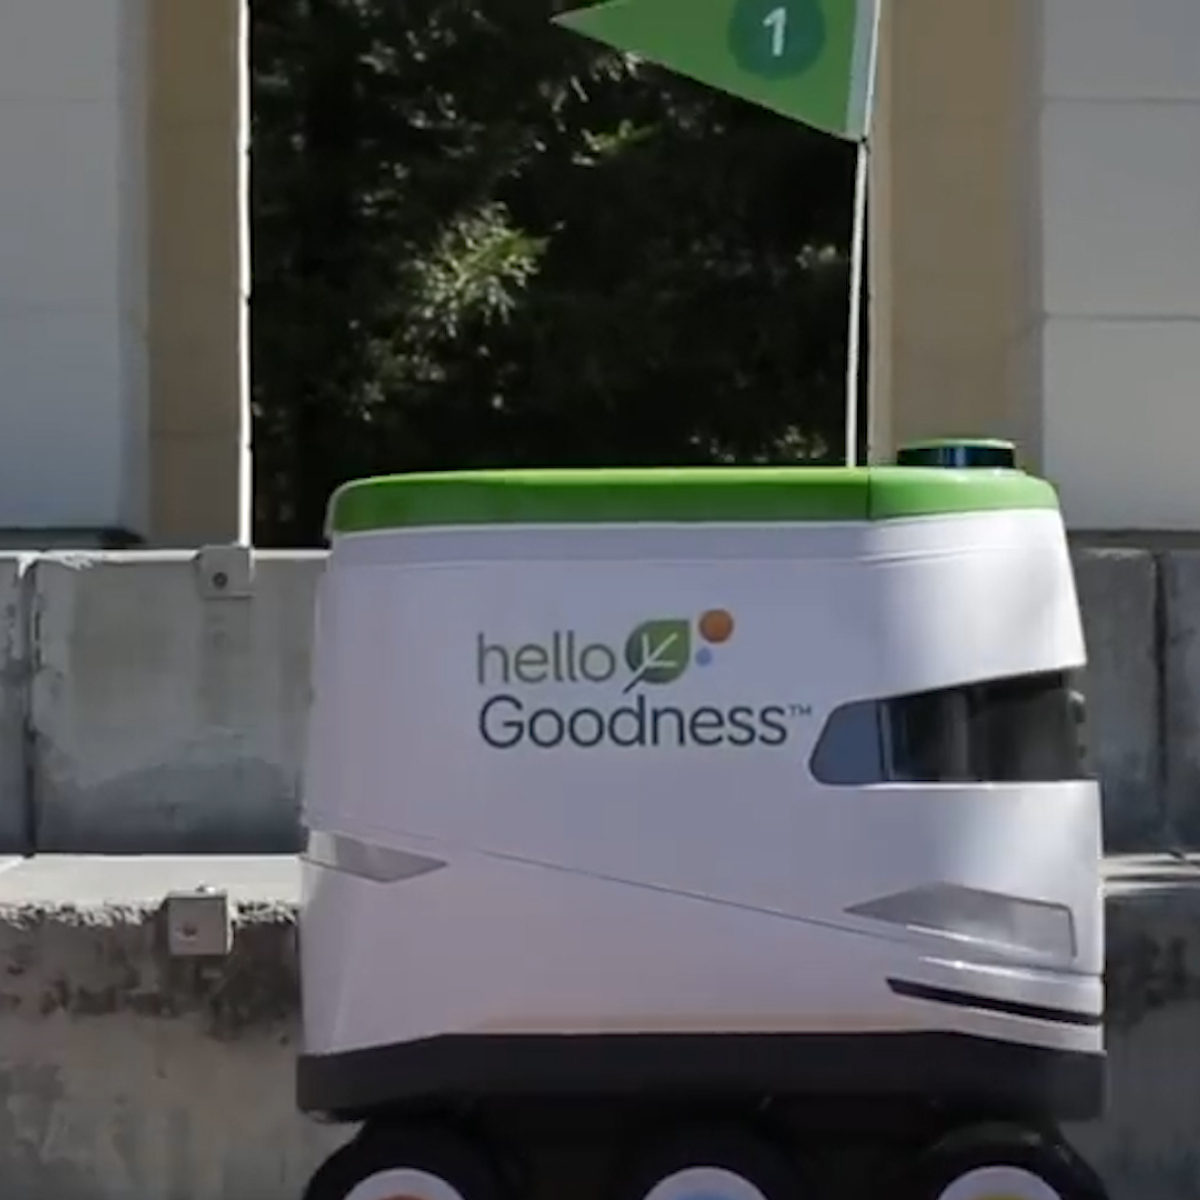 This little PepsiCo snack robot is a vending machine on wheels